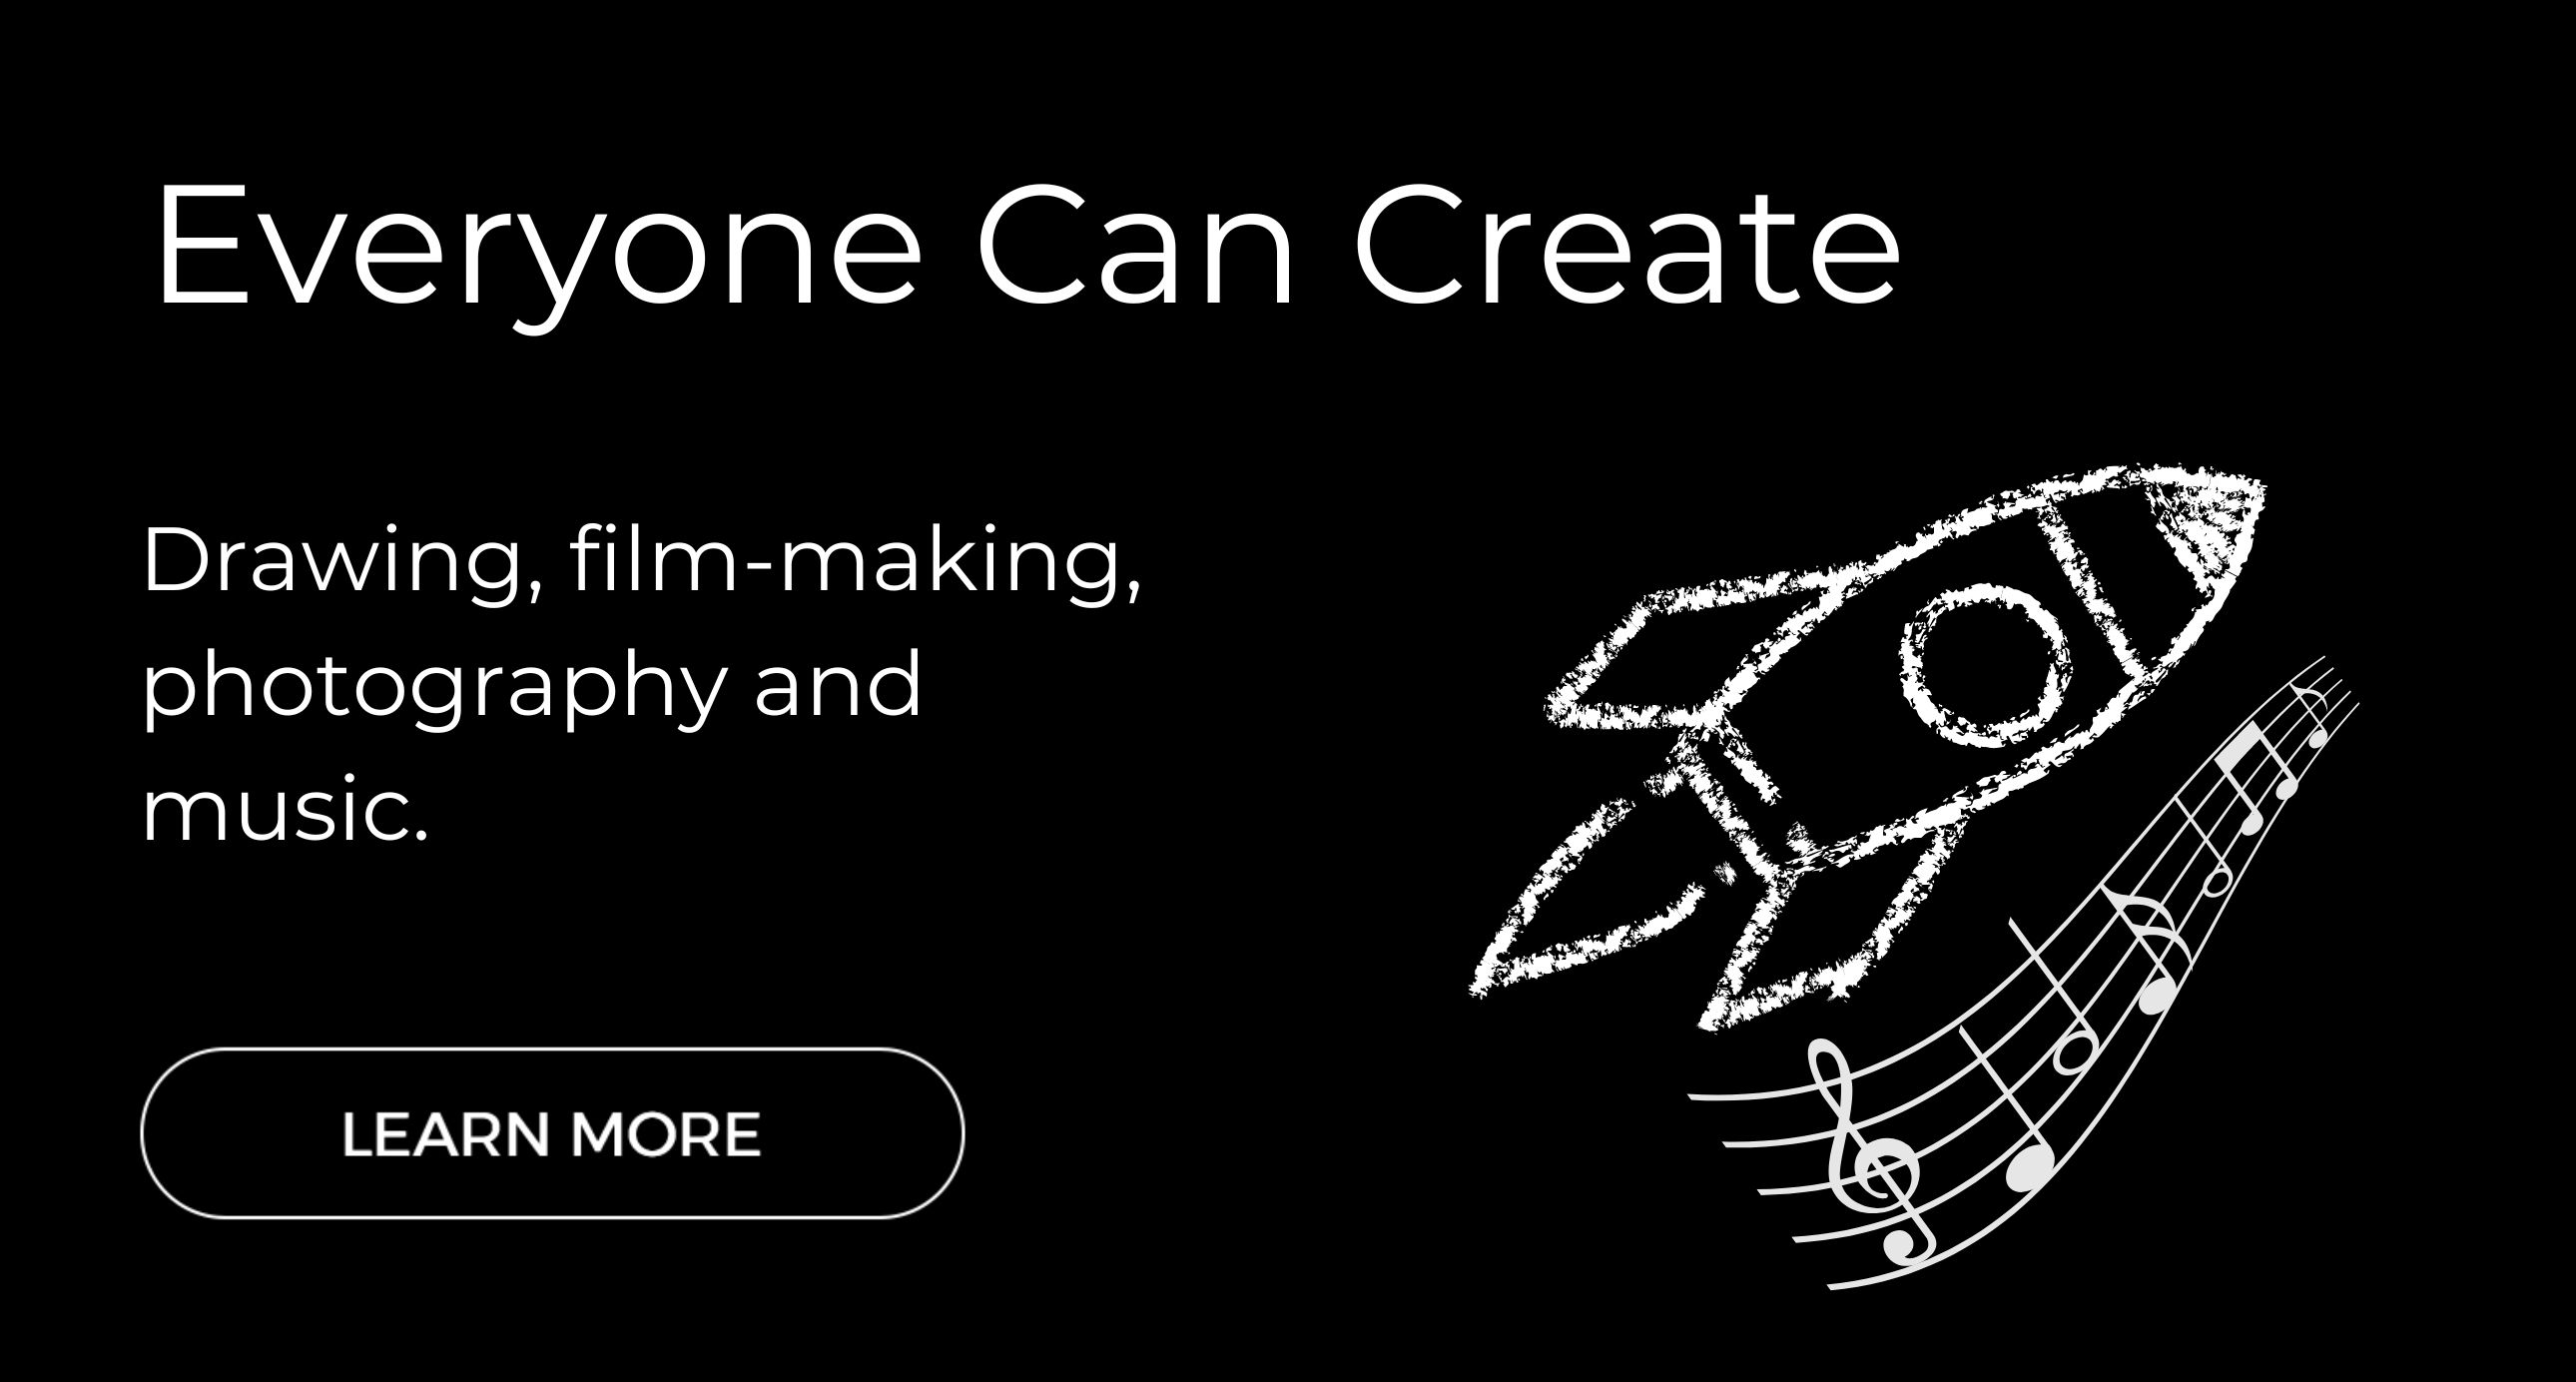 Everyone Can Create. Drawing, film-making, photography, and music. Click to learn more.